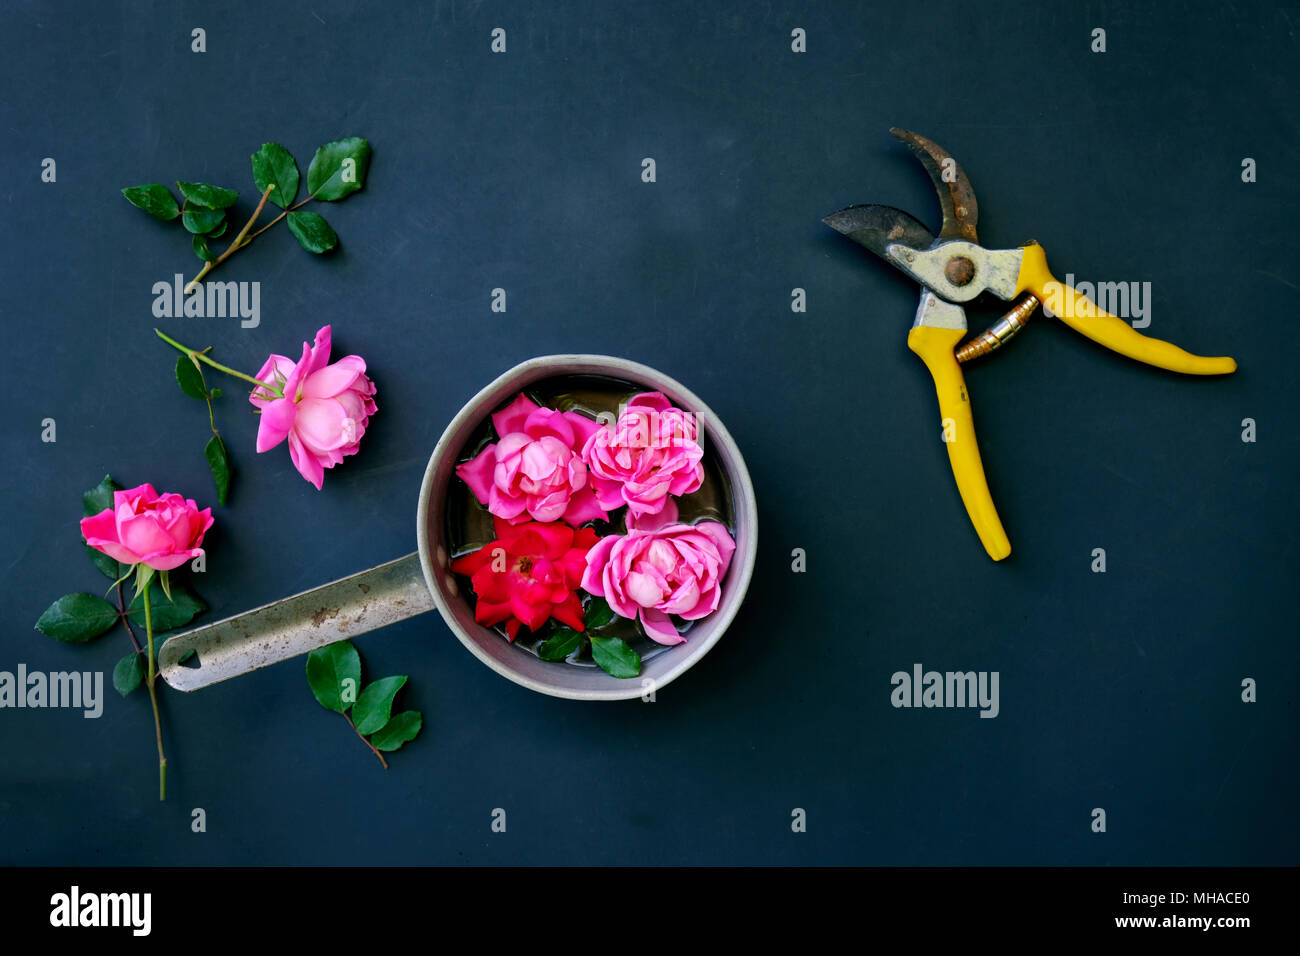 Pink roses as floral arrangement against background with pruning shears.  Gardening shown with simple greenery and color. Stock Photo